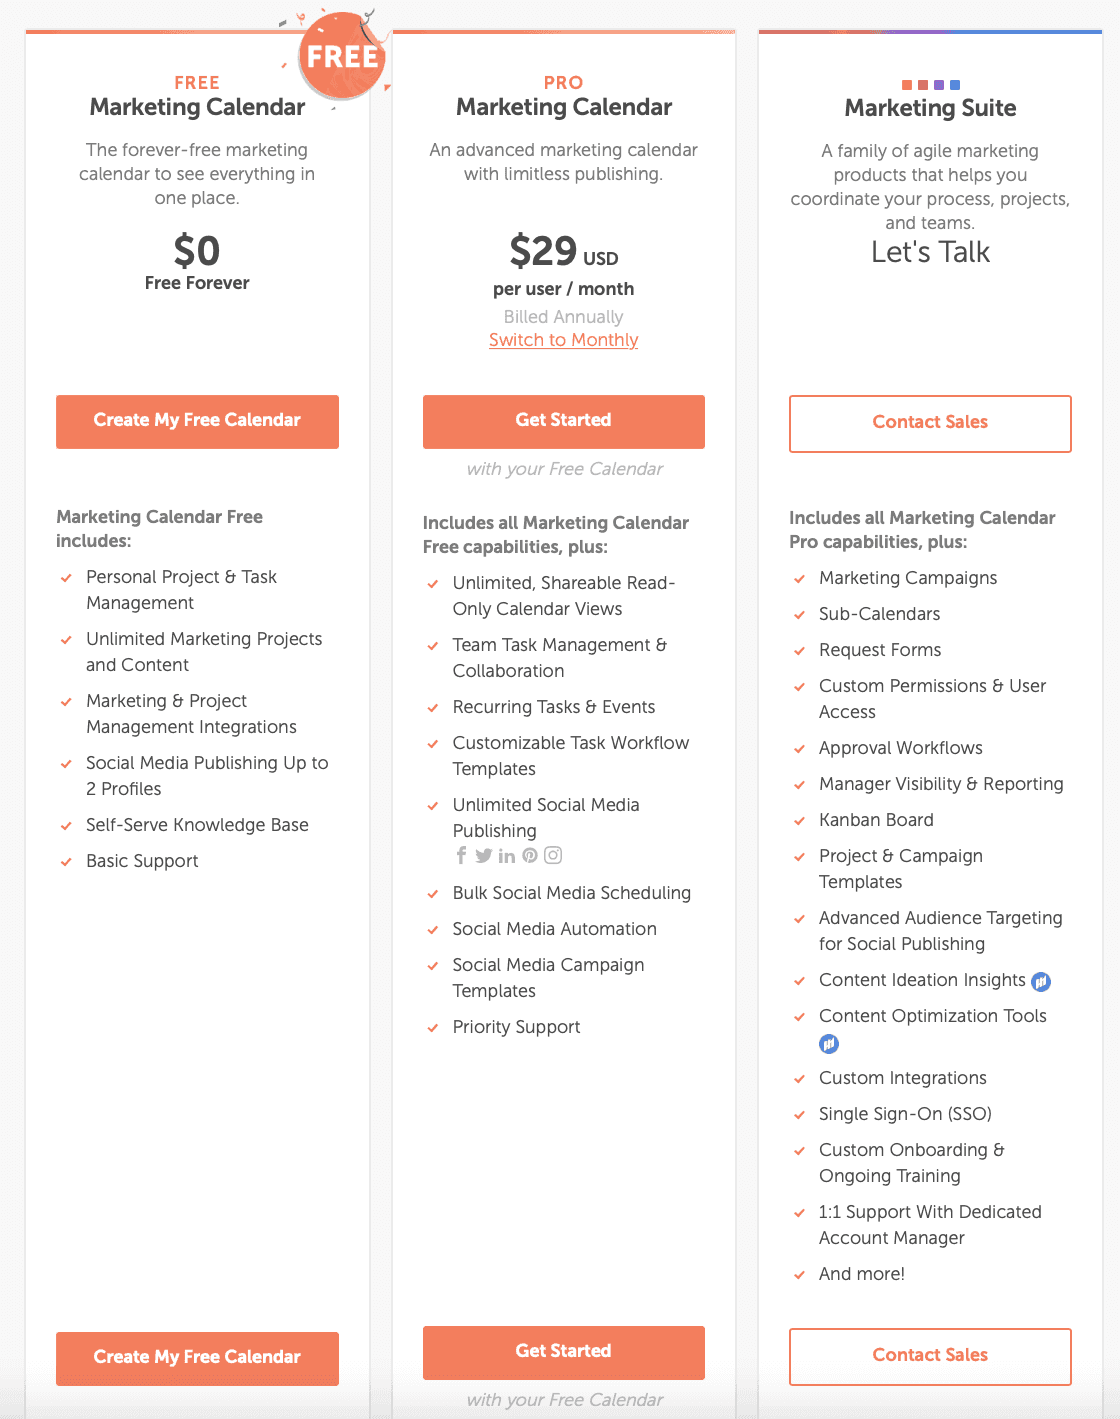 CoSchedule marketing suite plans and pricing.